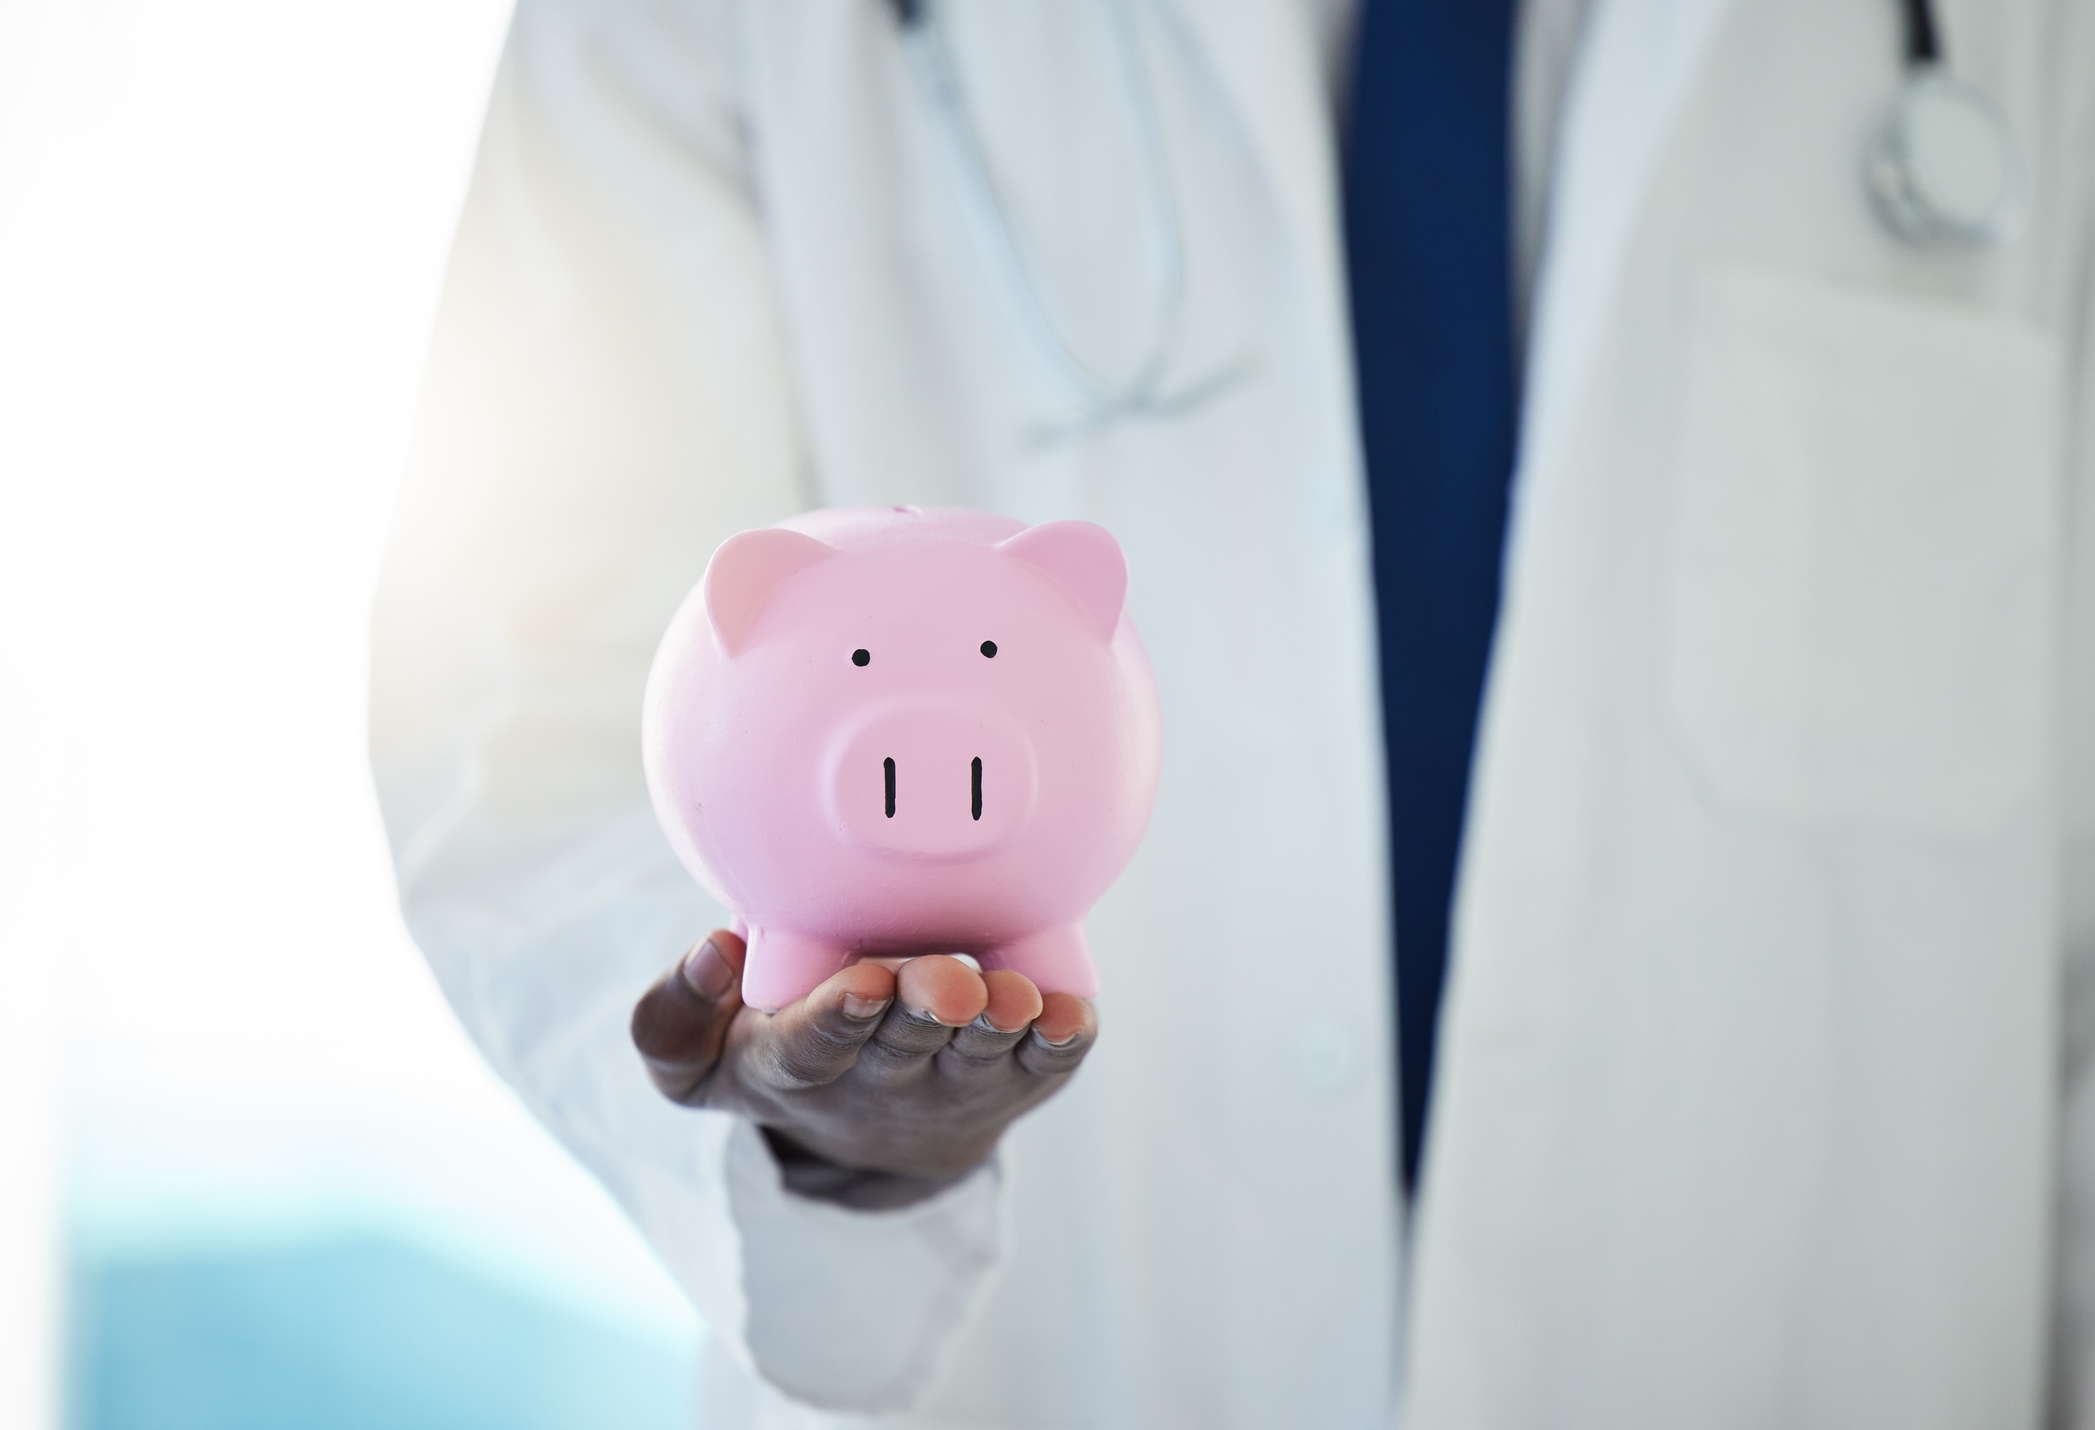 Physician Salaries Trend Back Up After Pandemic Hit